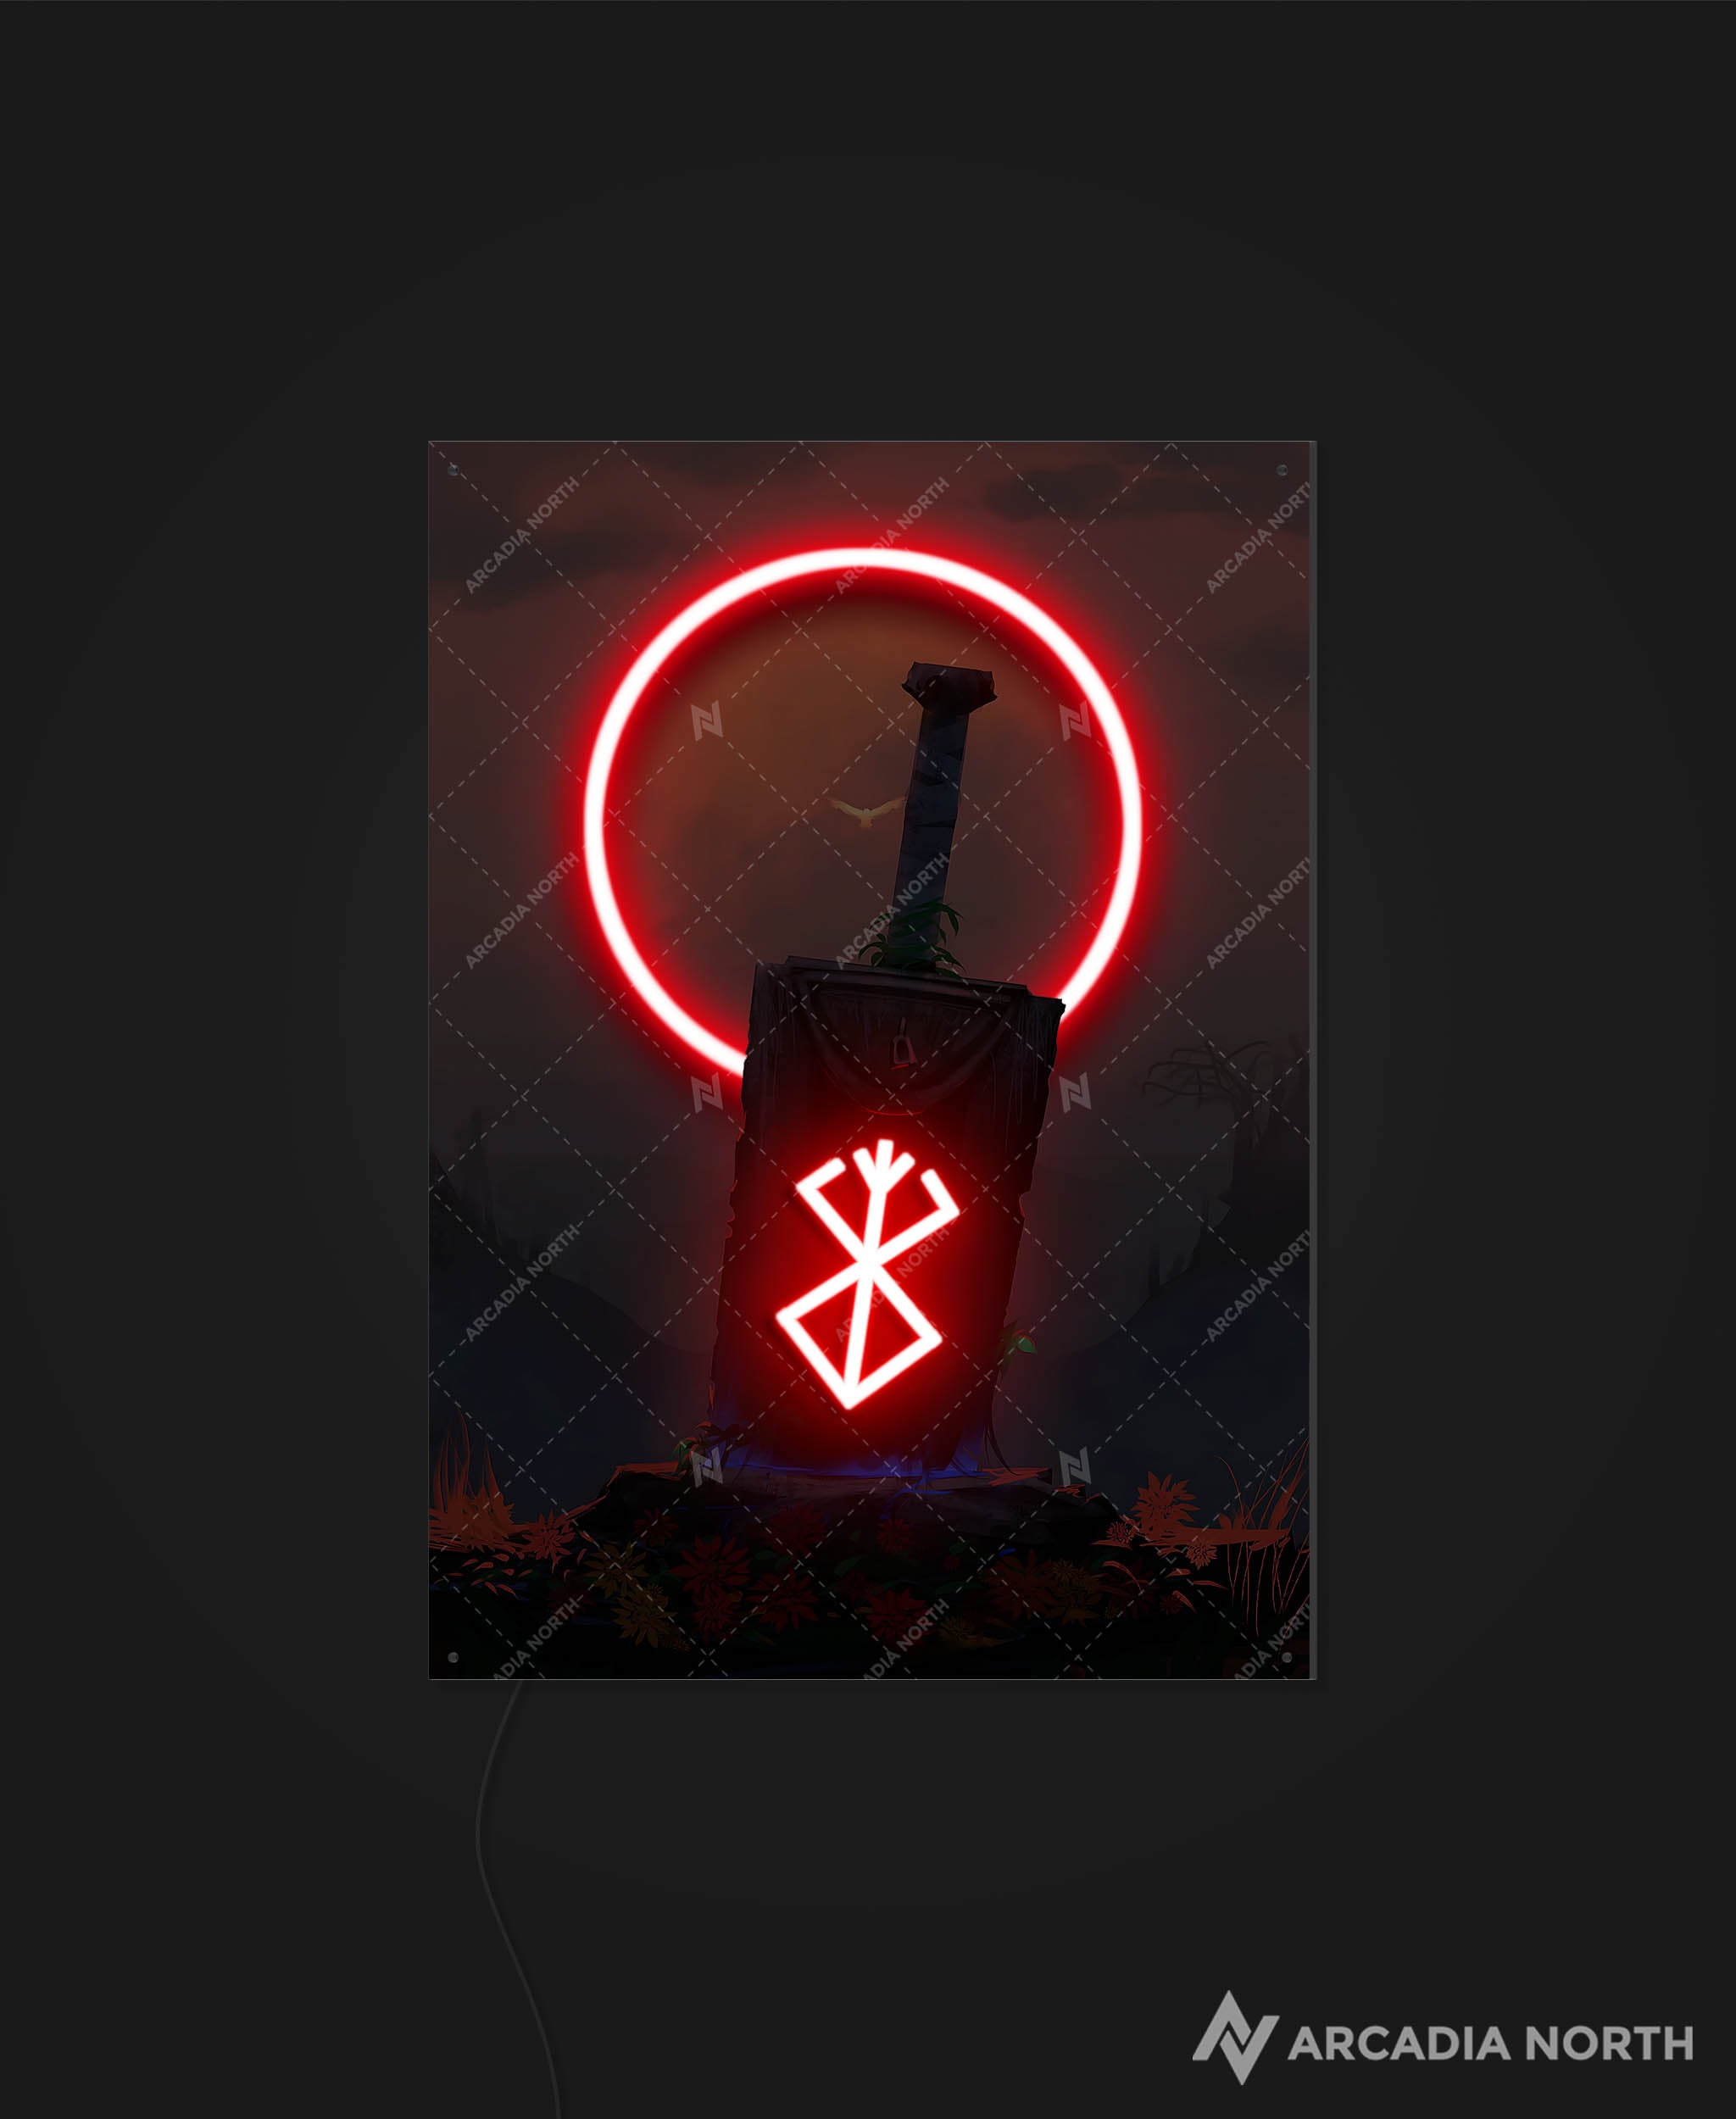 Arcadia North AURALIGHT - an LED Poster featuring the anime Berserk with Guts' Dragon Slayer sword and Brand of Sacrifice illuminated by glowing neon LED lights and UV-printed on acrylic